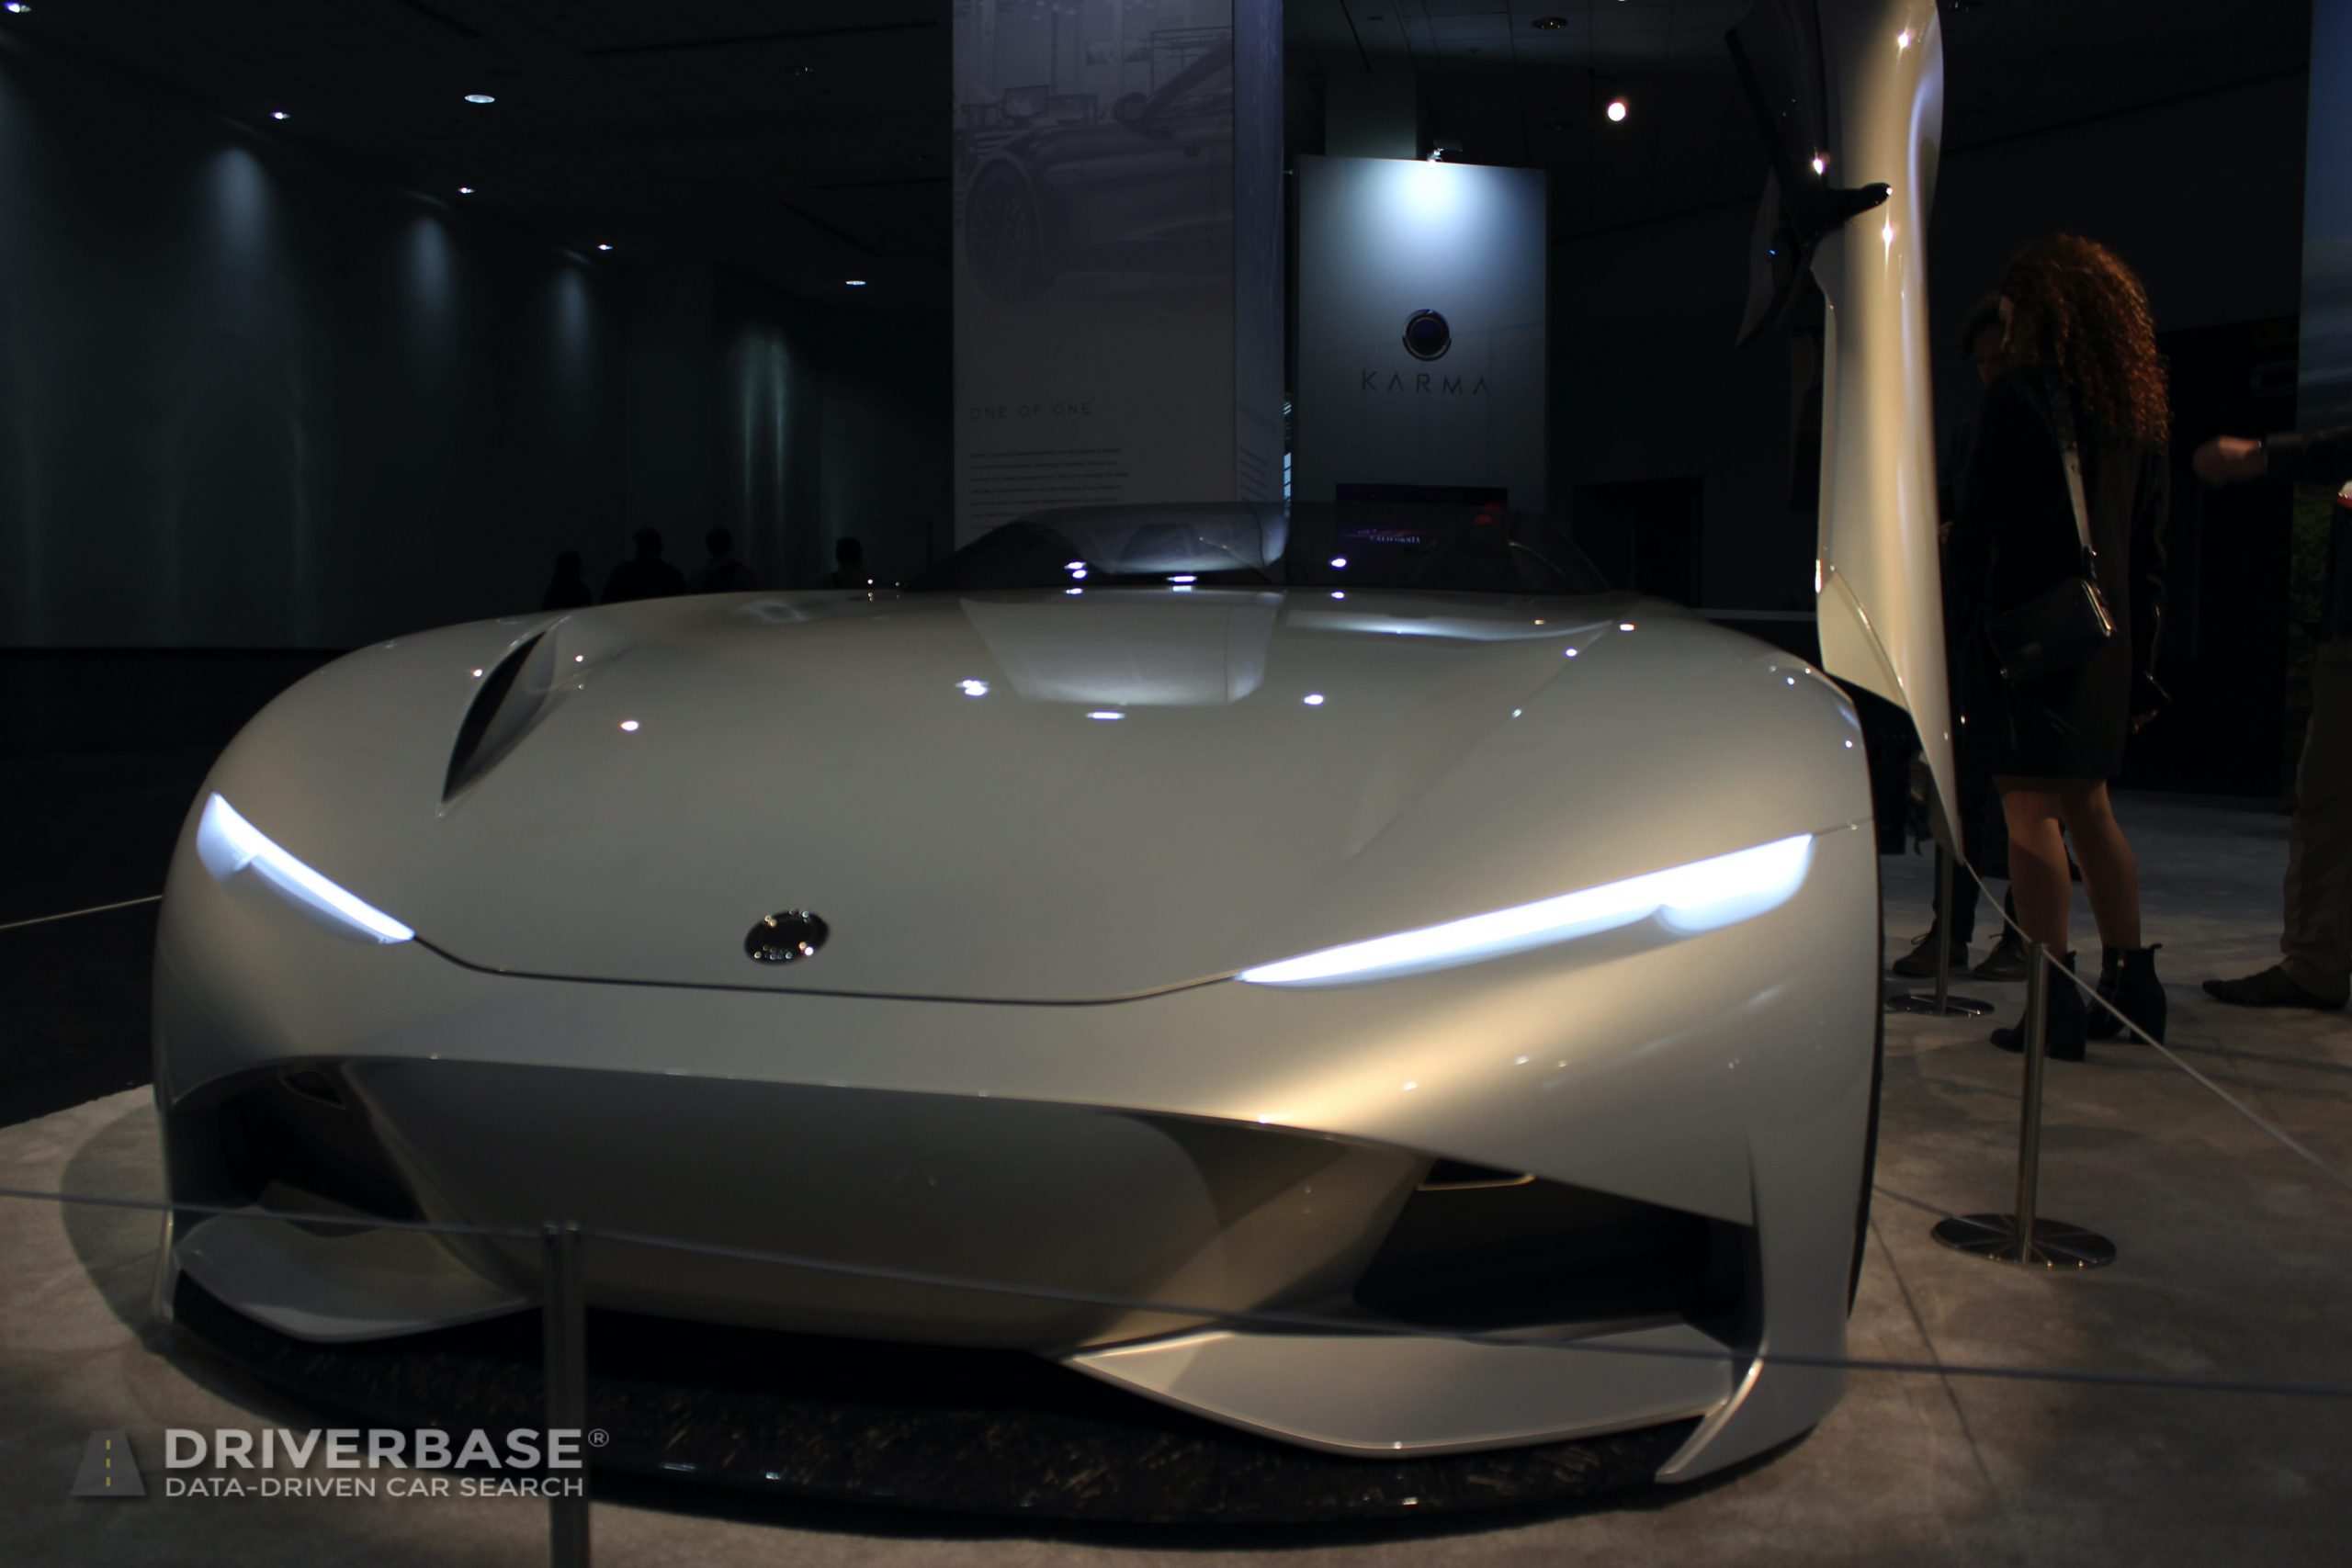 Karma SC1 Vision at the 2019 Los Angeles Auto Show